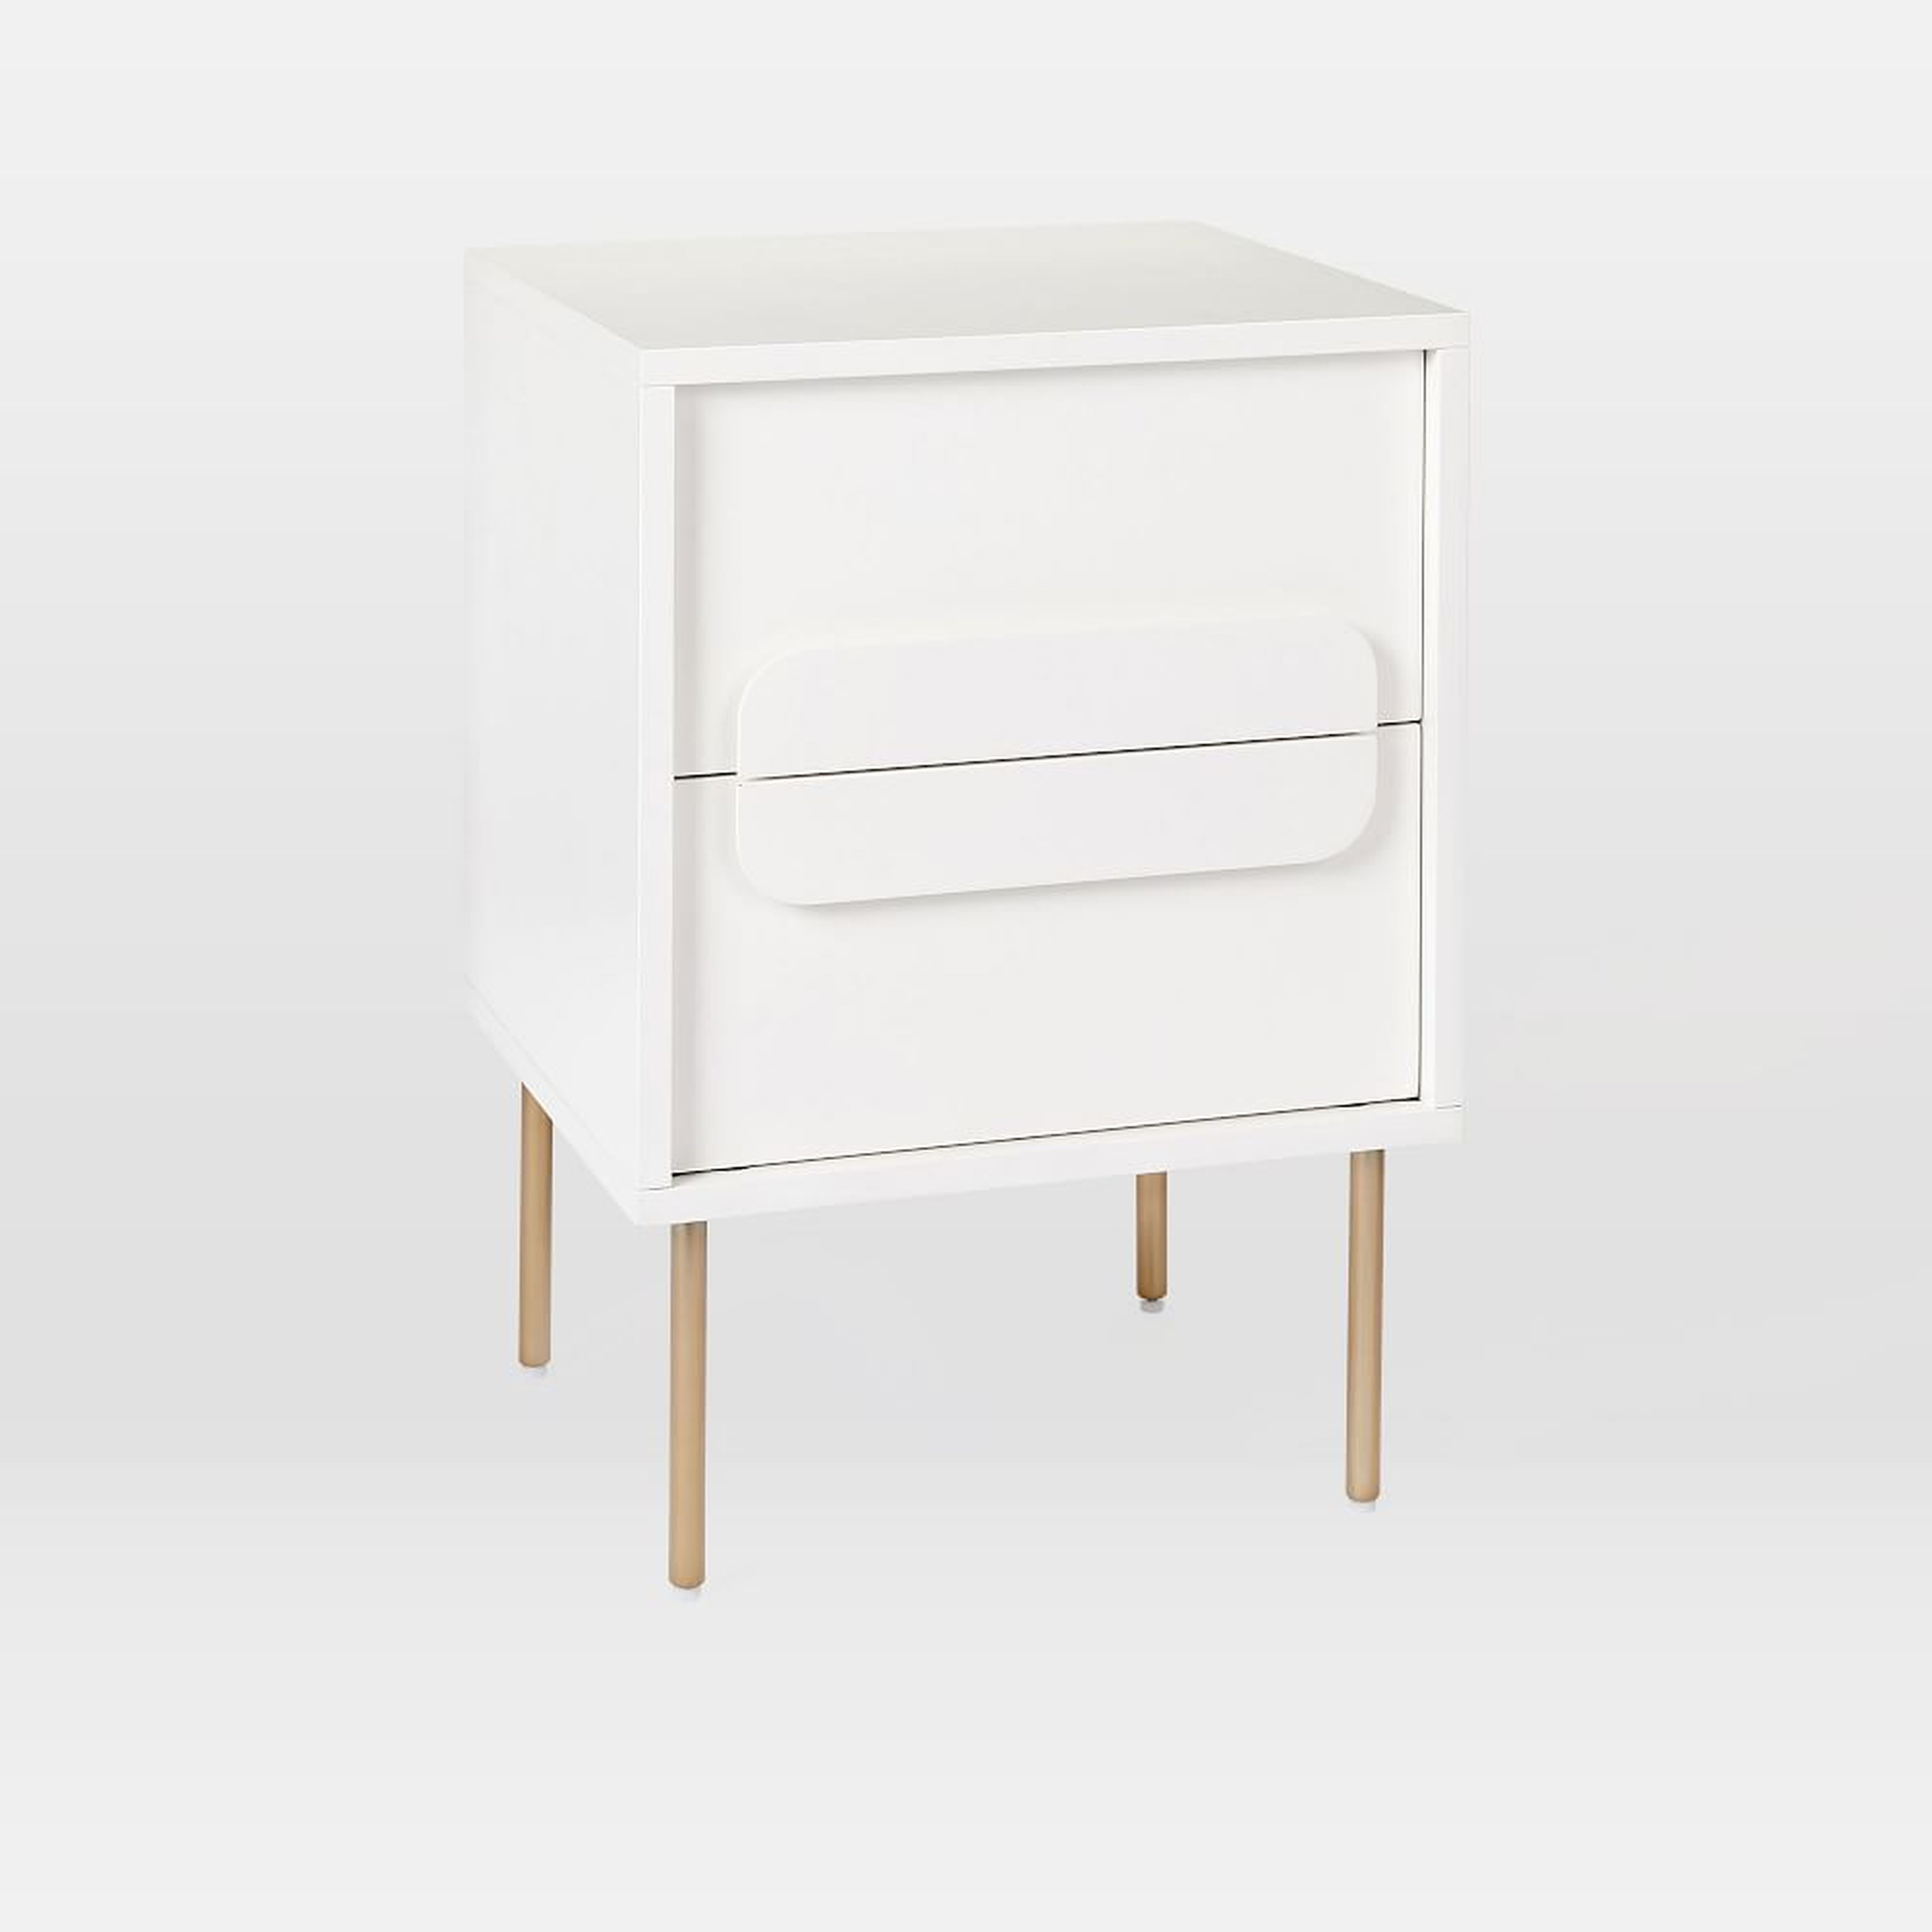 Gemini (18") Nightstand, White Lacquer - West Elm